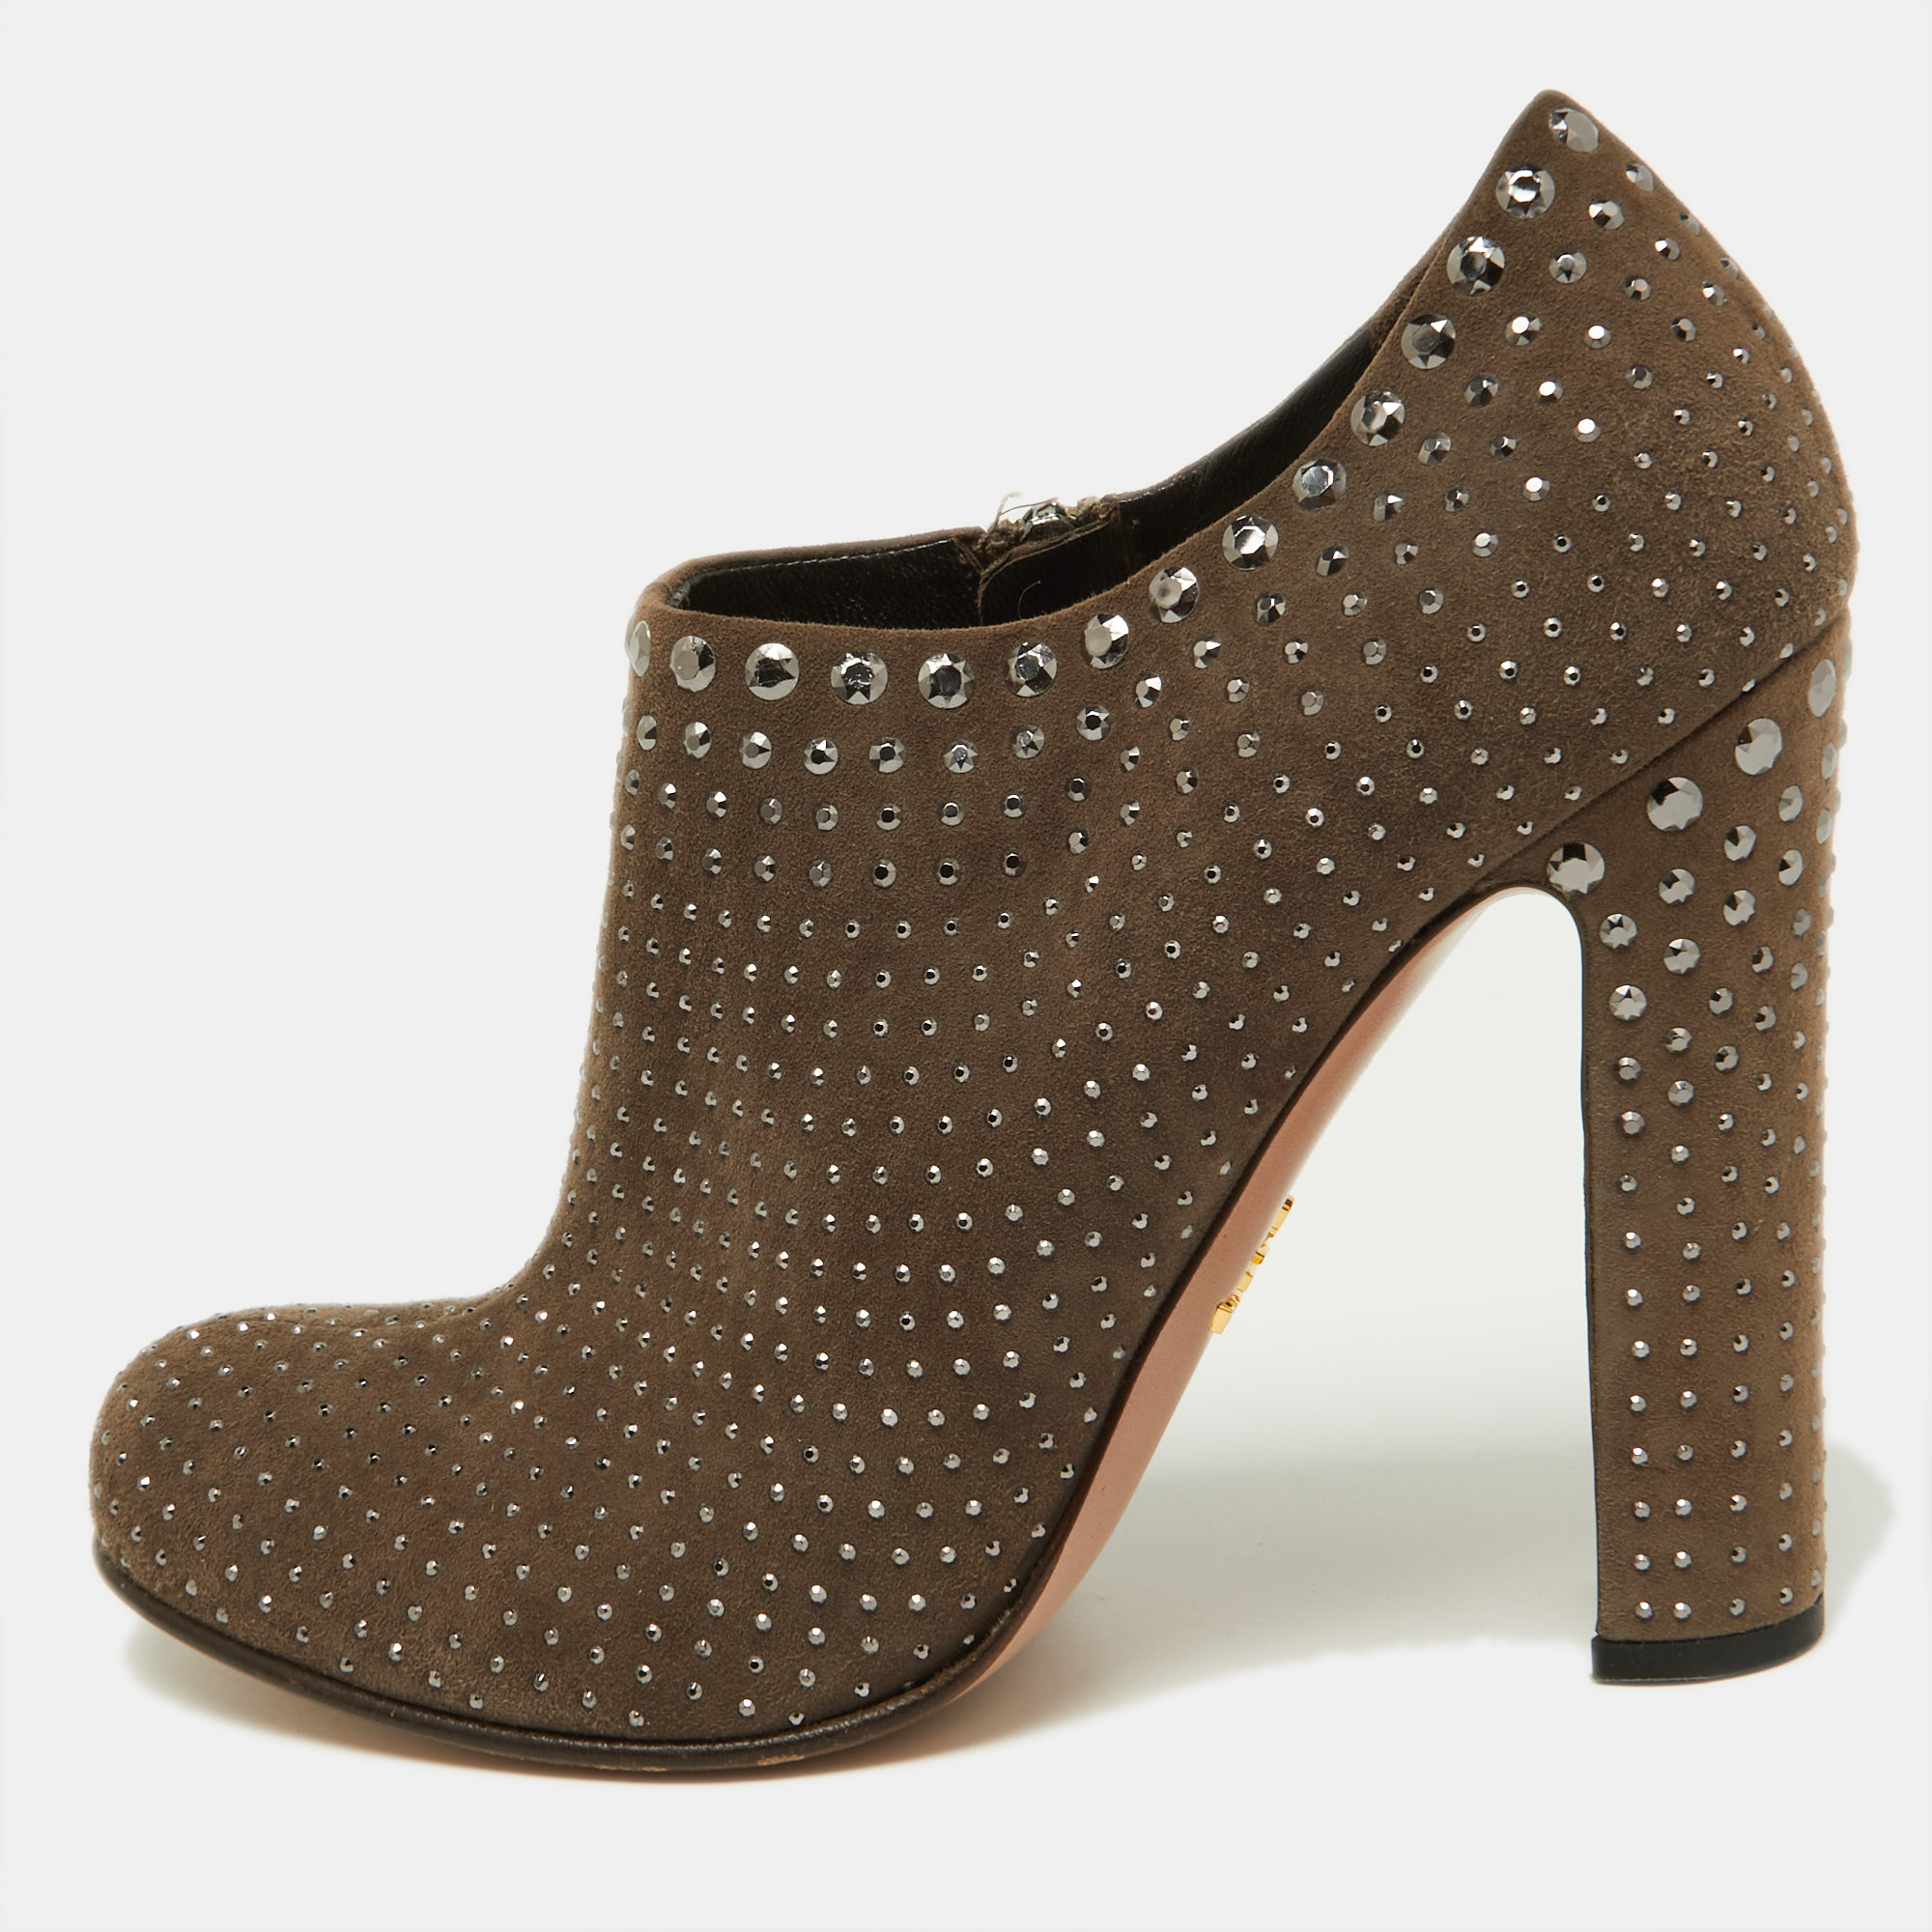 Prada brown studded suede ankle booties size 38